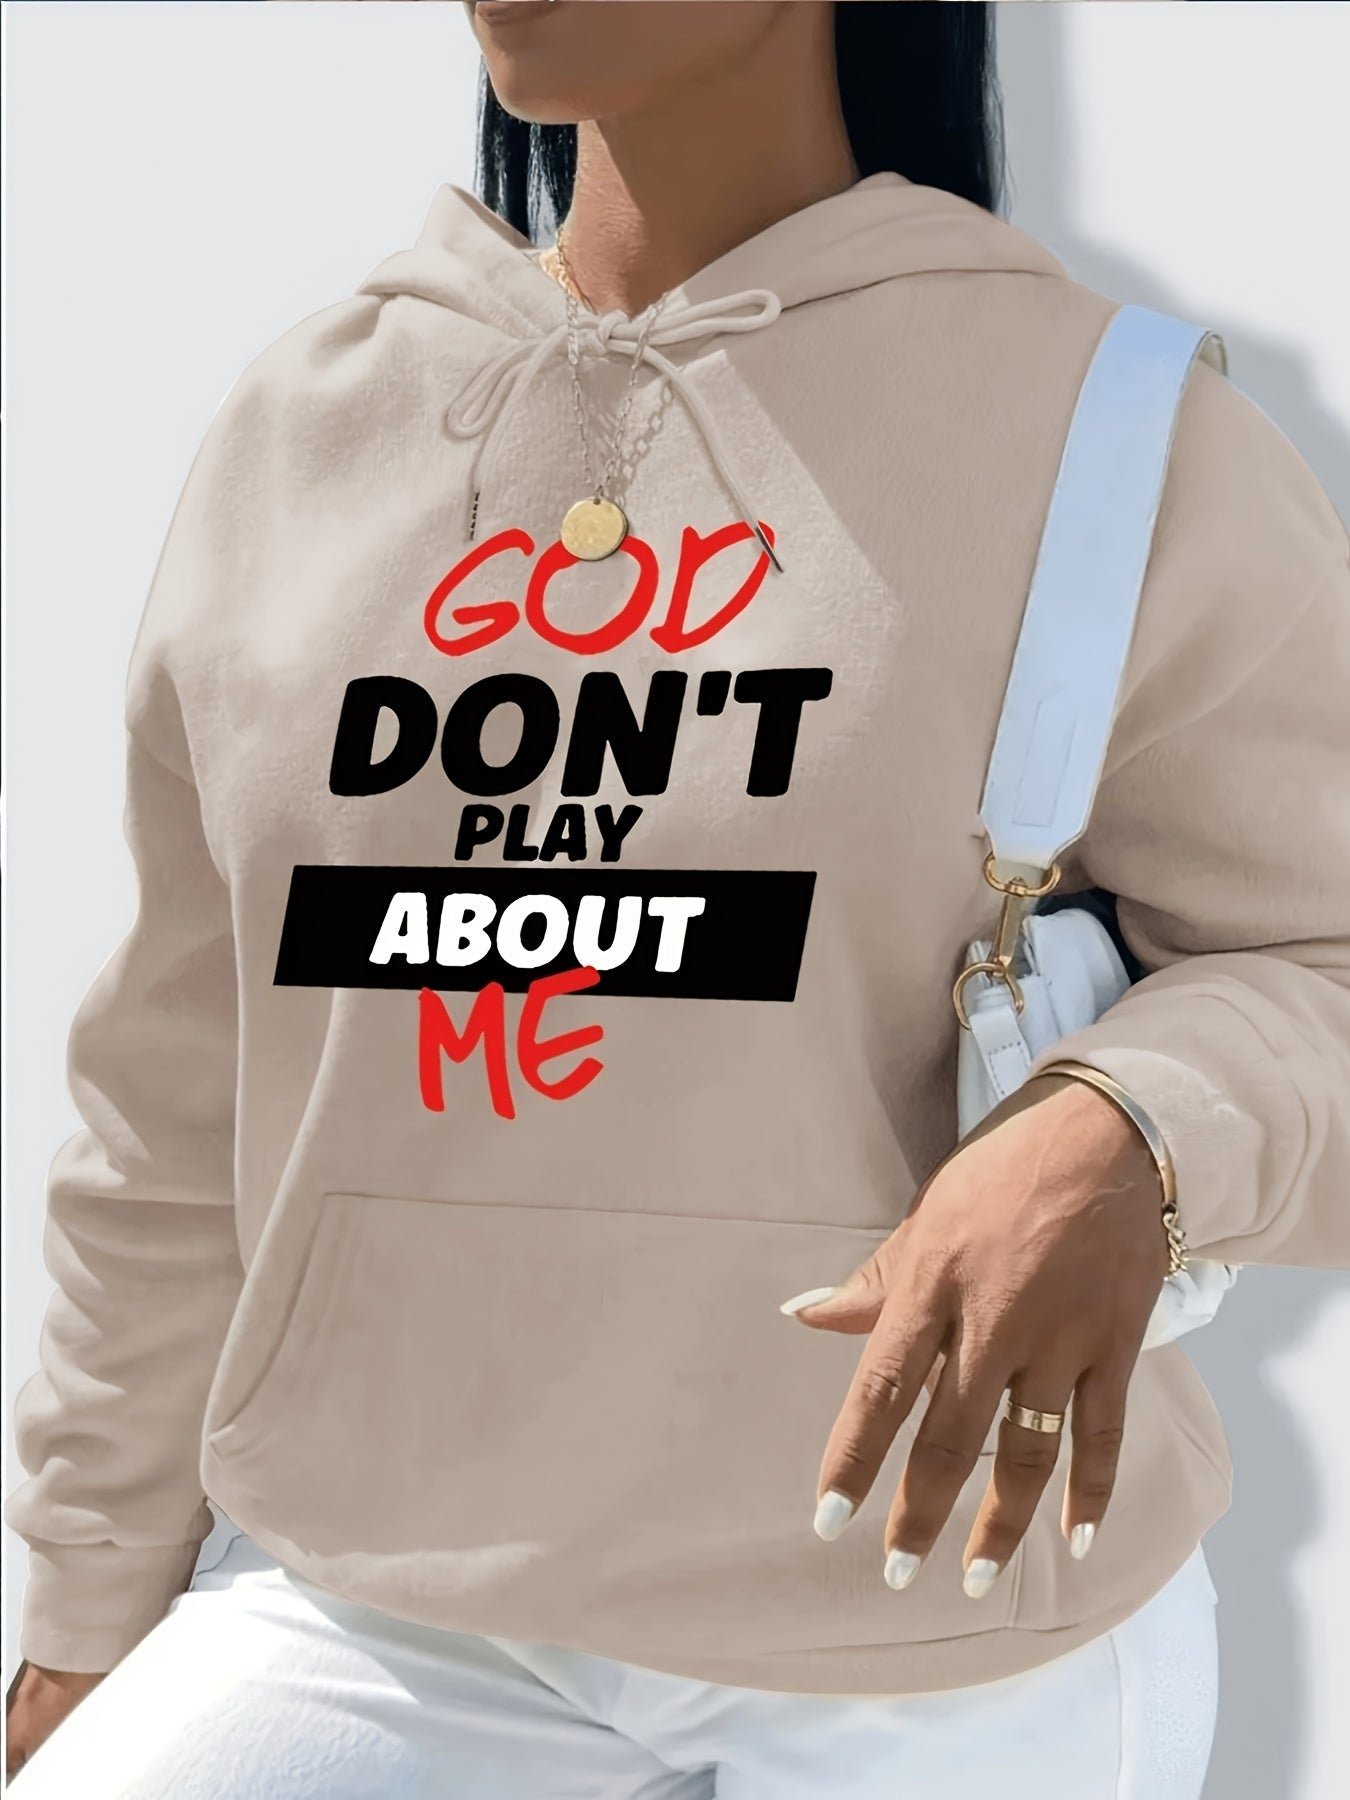 God Don't Play About Me Women's Christian Hooded Pullover Sweatshirt claimedbygoddesigns